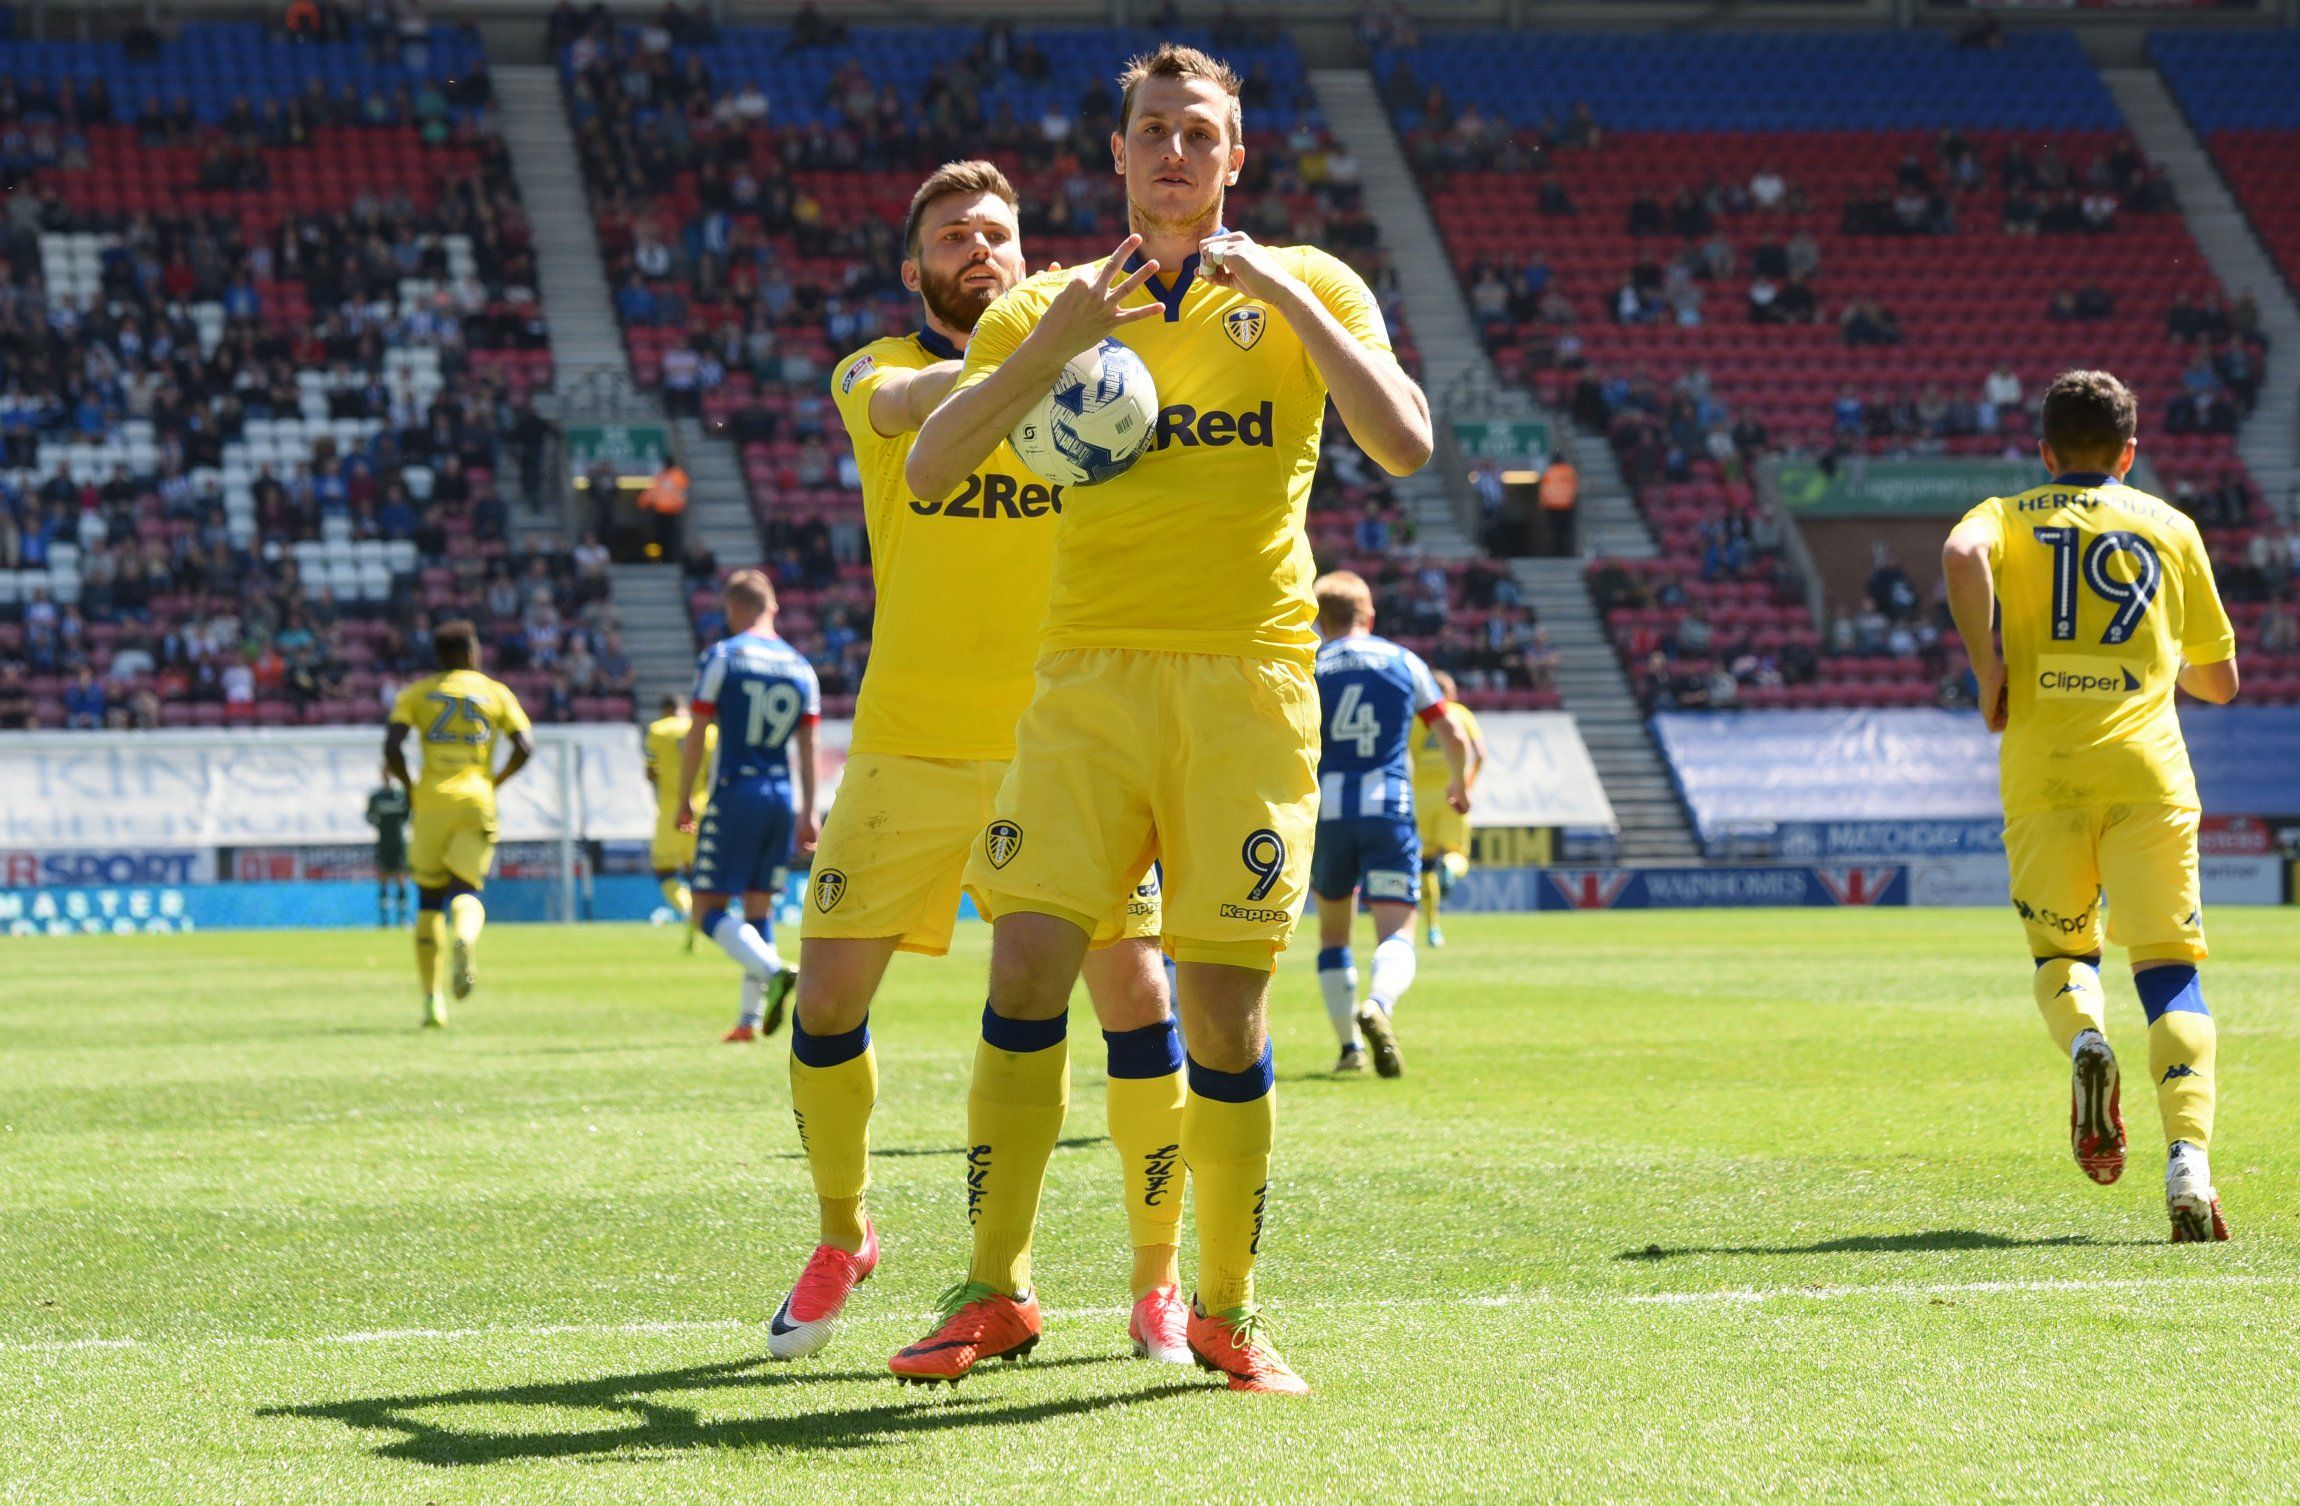 Leeds pulled off blinder with Chris Wood